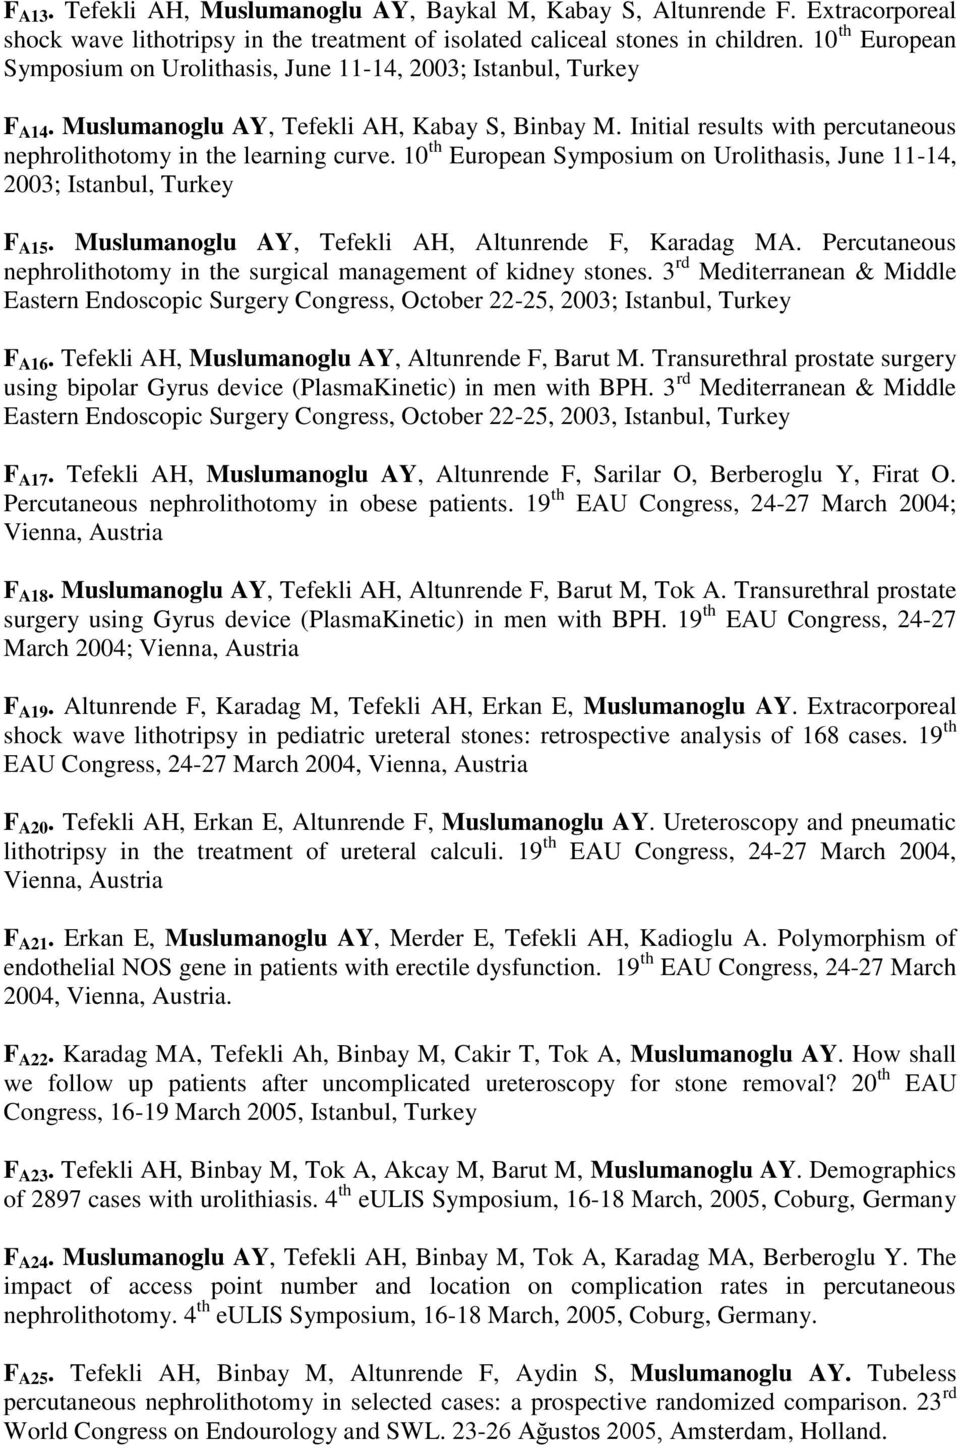 Initial results with percutaneous nephrolithotomy in the learning curve. 10 th European Symposium on Urolithasis, June 11-14, 2003; Istanbul, Turkey F A15.